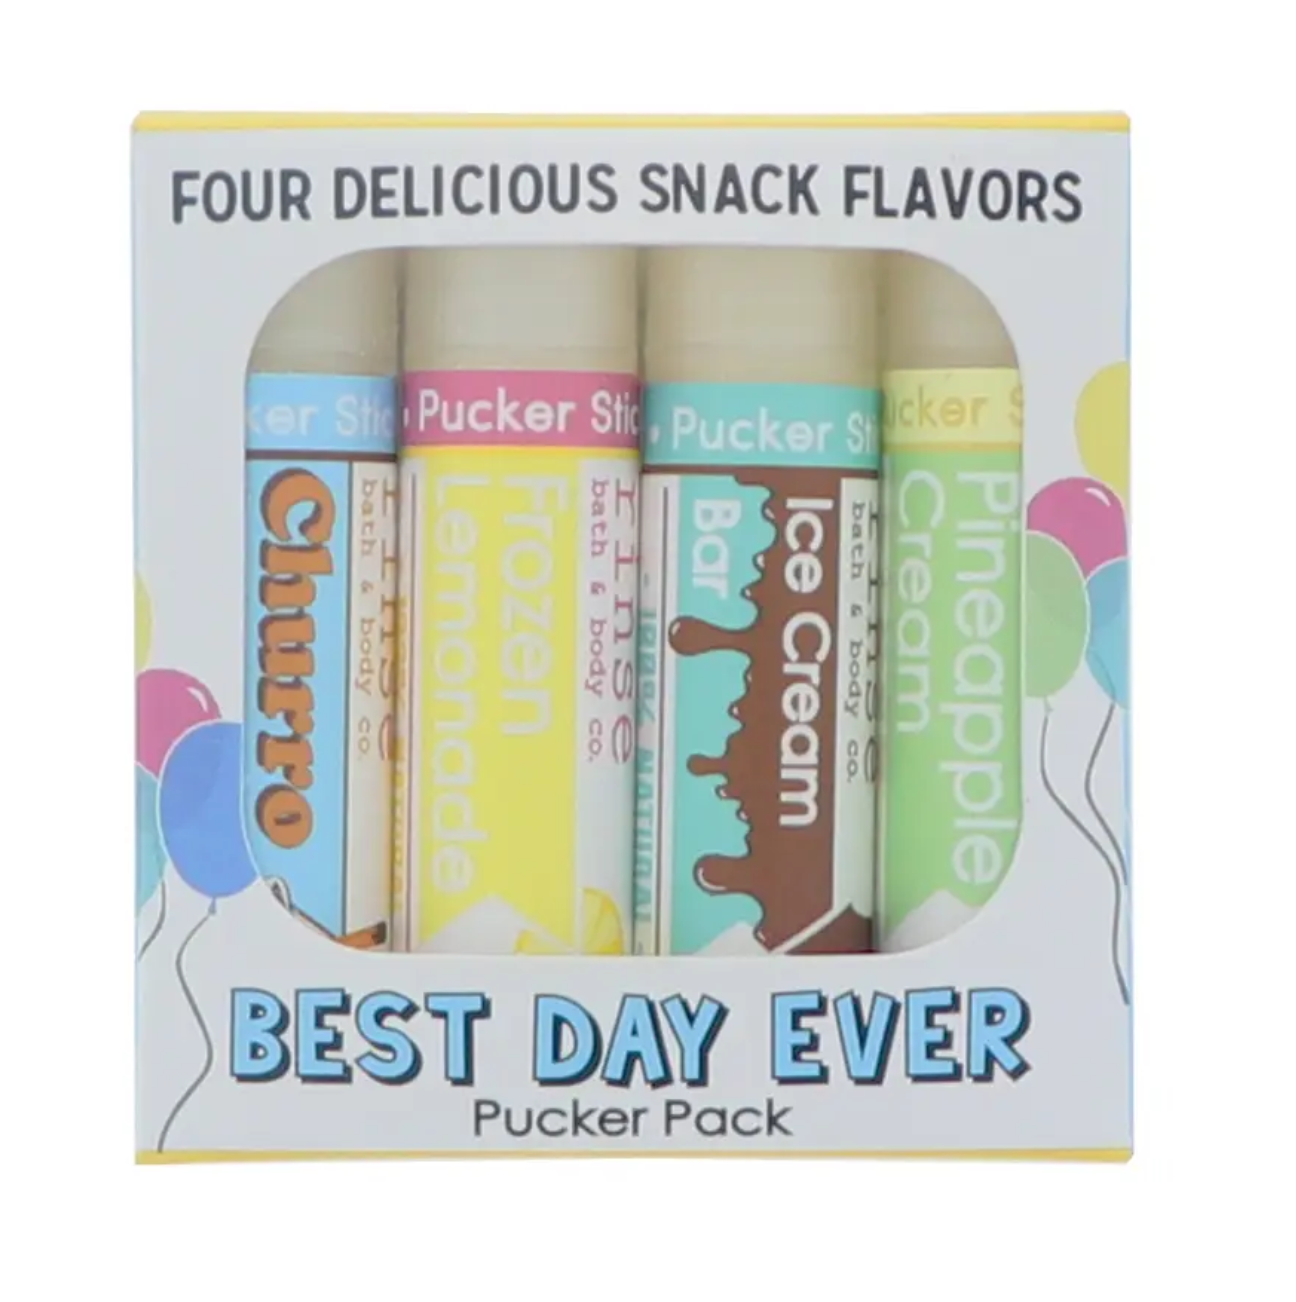 Pucker Stick - Best Day Ever Pack